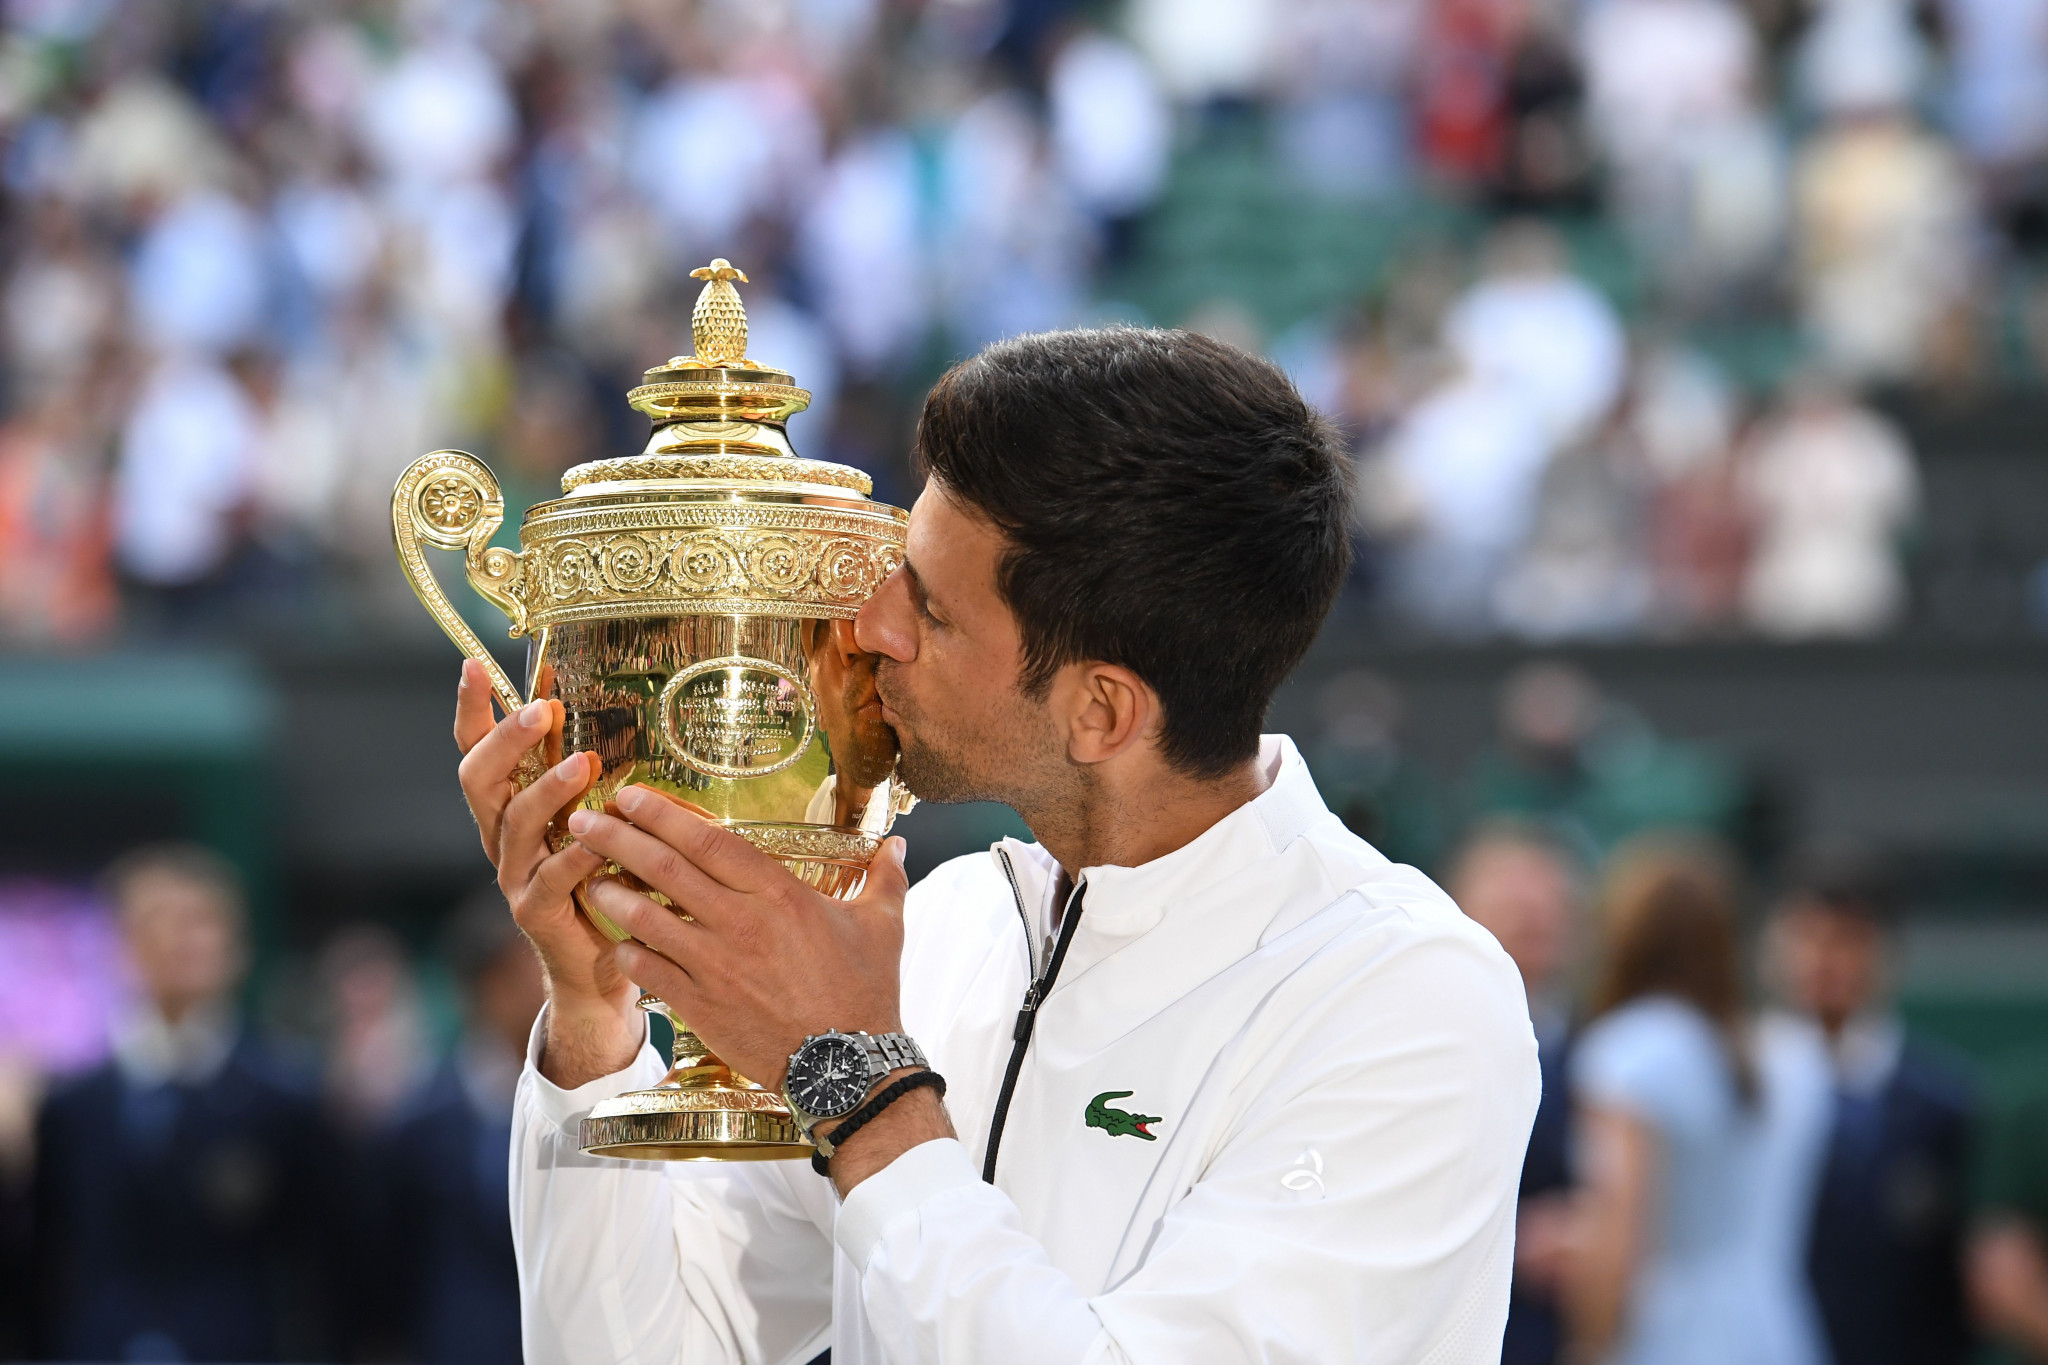 Novak Djokovic defeated Roger Federer in one of the greatest men's singles finals at Wimbledon ©Getty Images